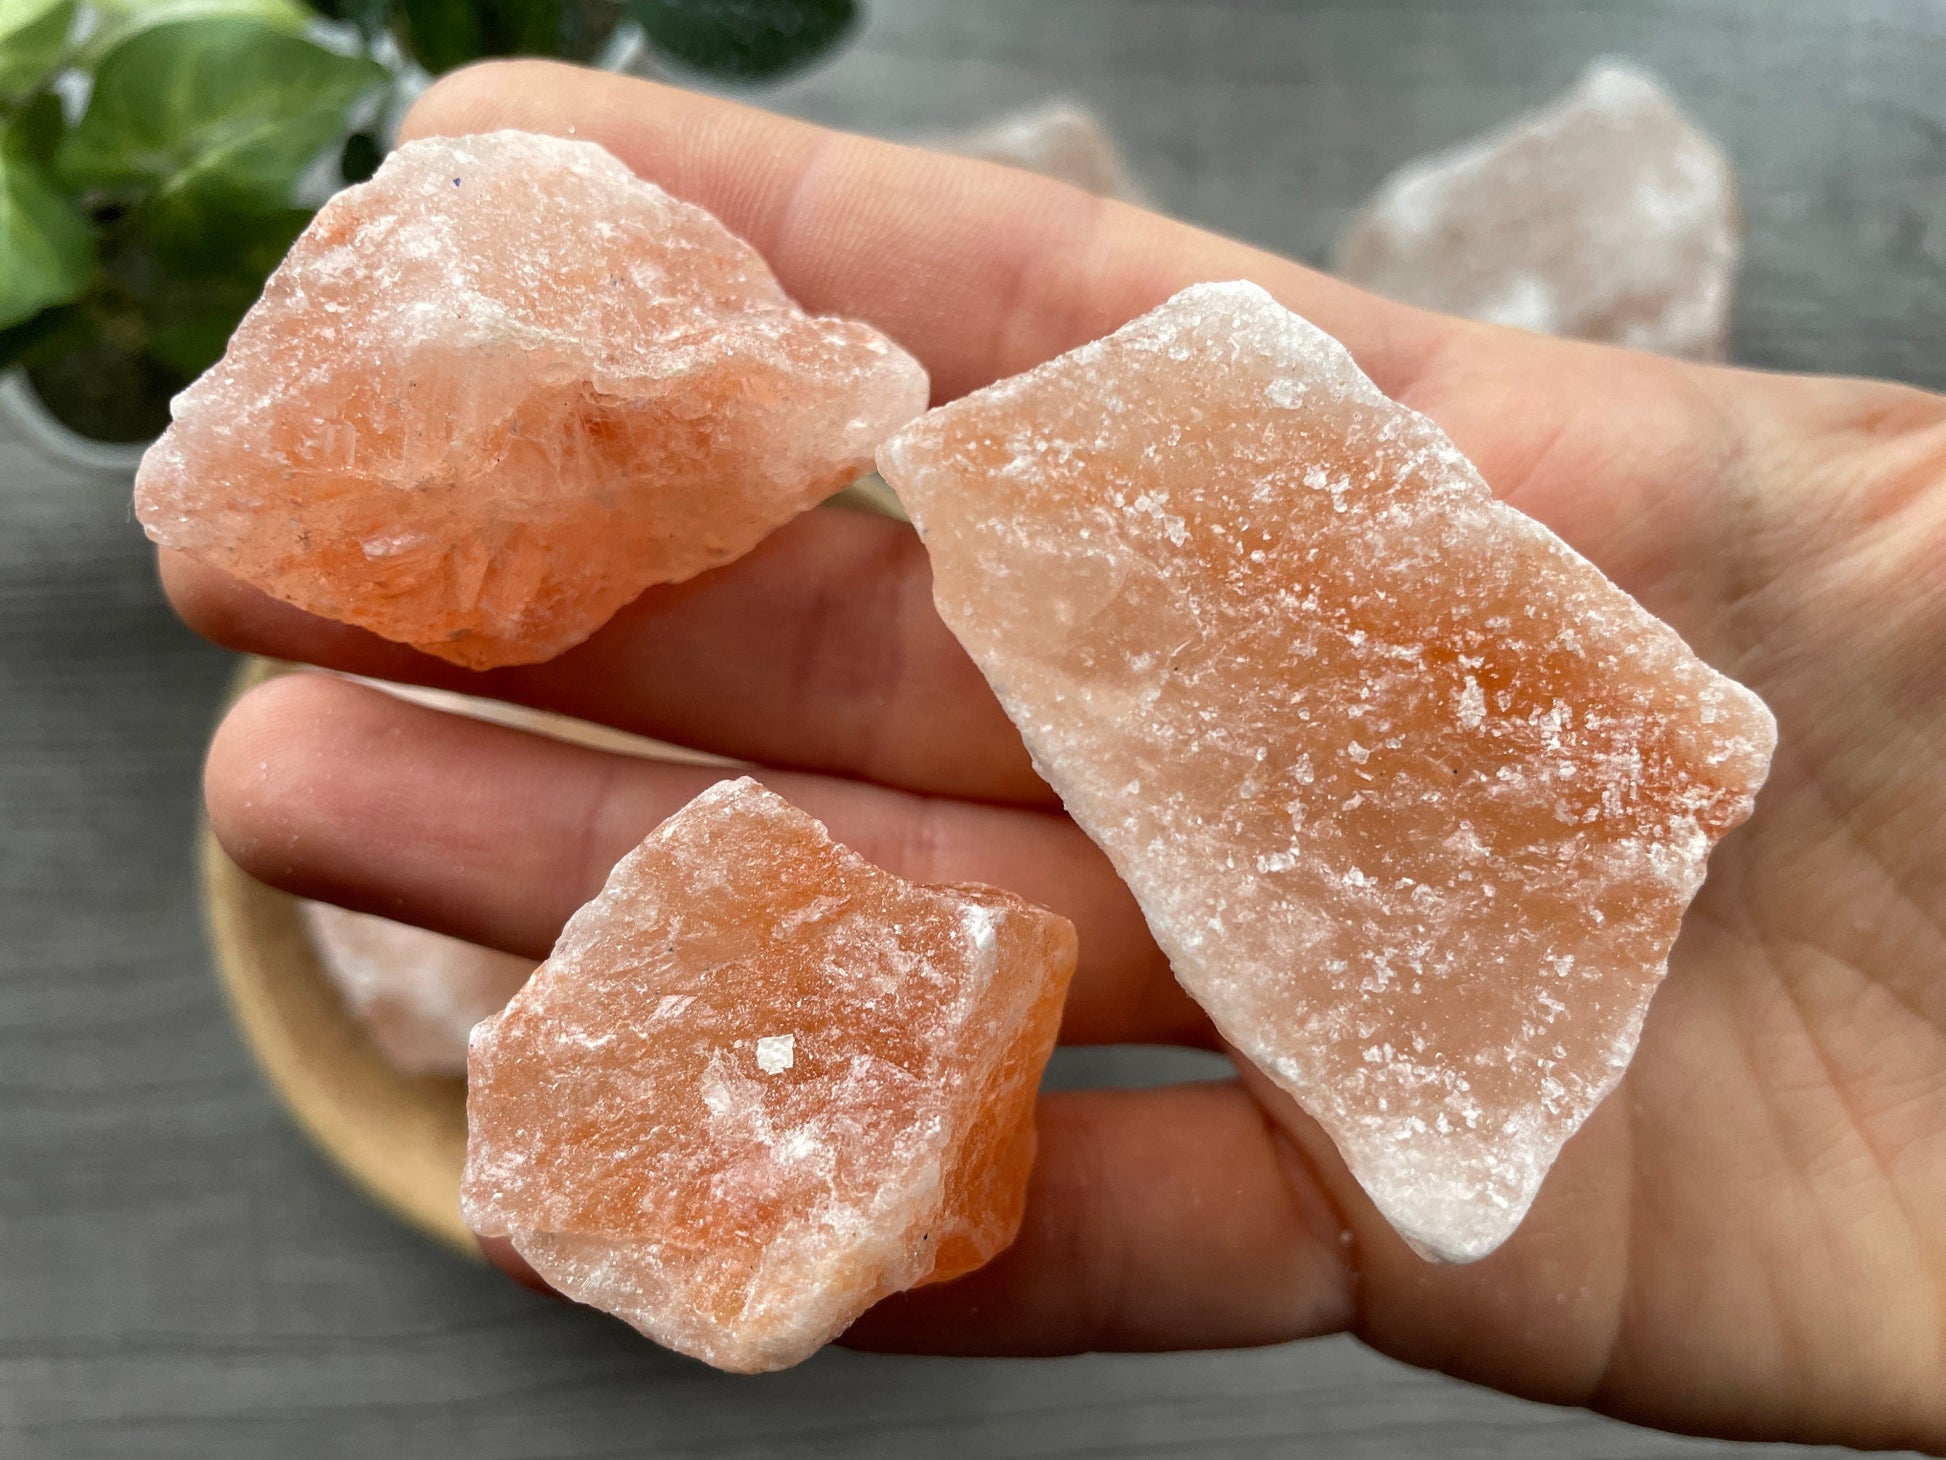 Pictured are various pieces of raw himalayan salt.